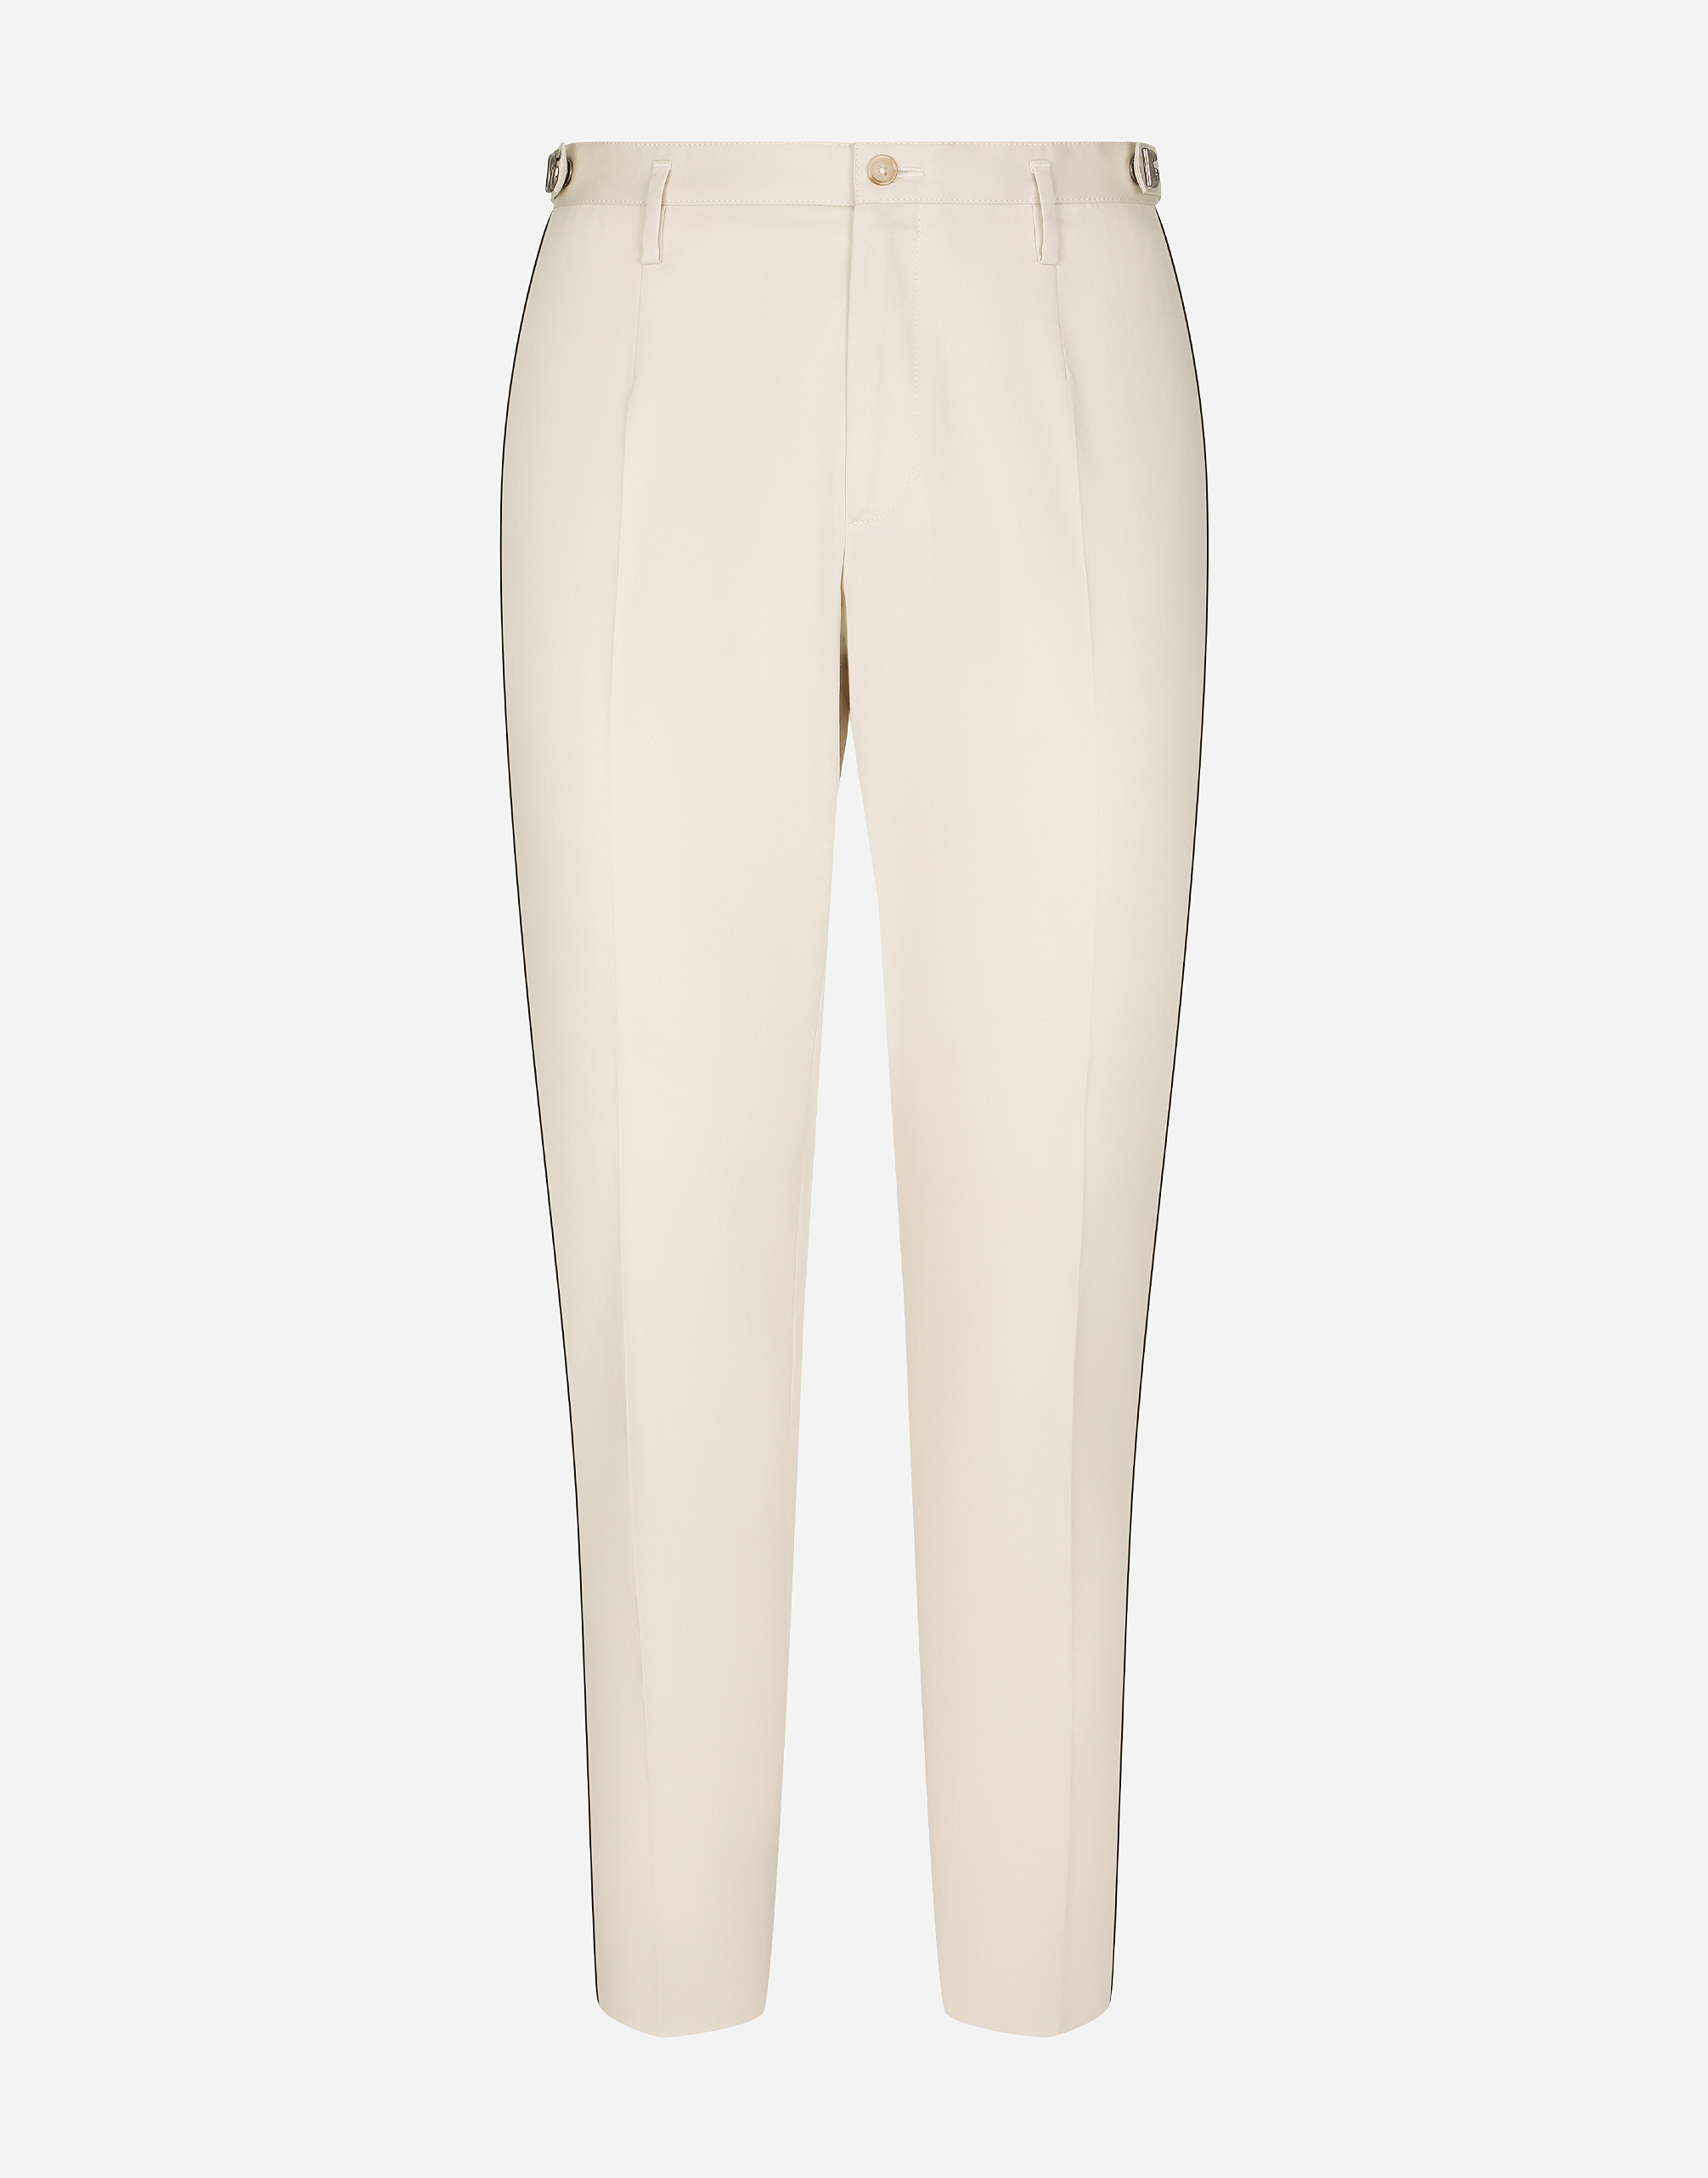 Stretch cotton pants with DG hardware in Beige